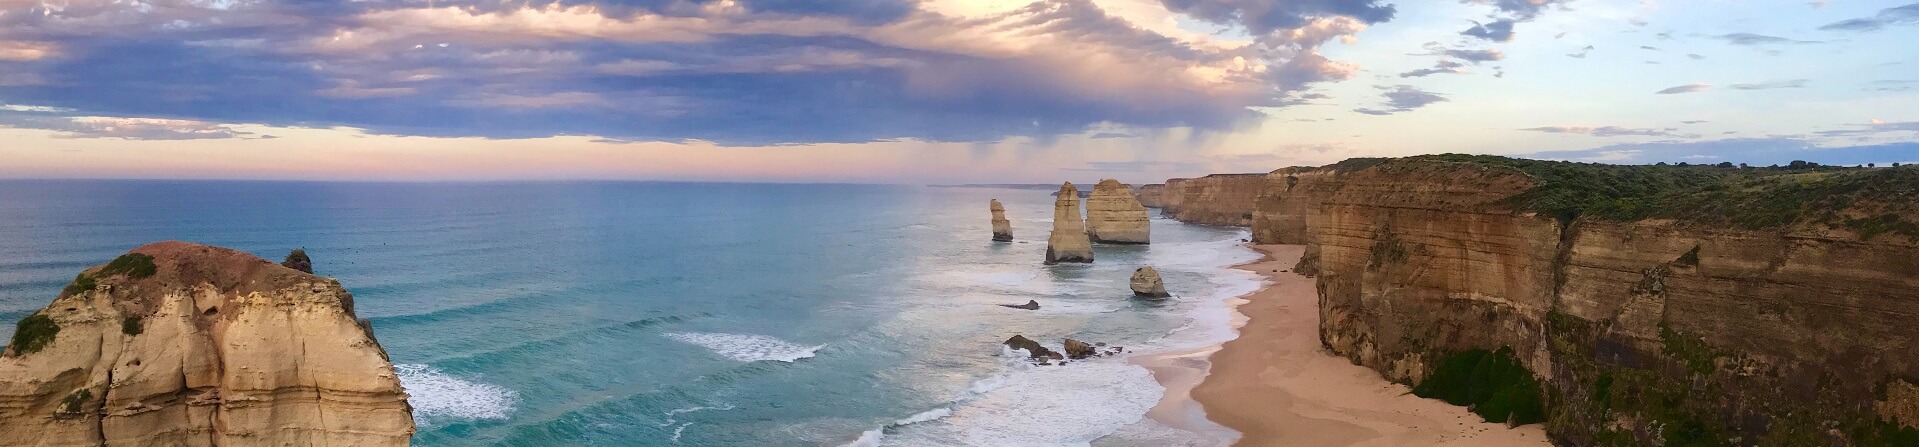 Is the 12 Apostles a wonder of the world?